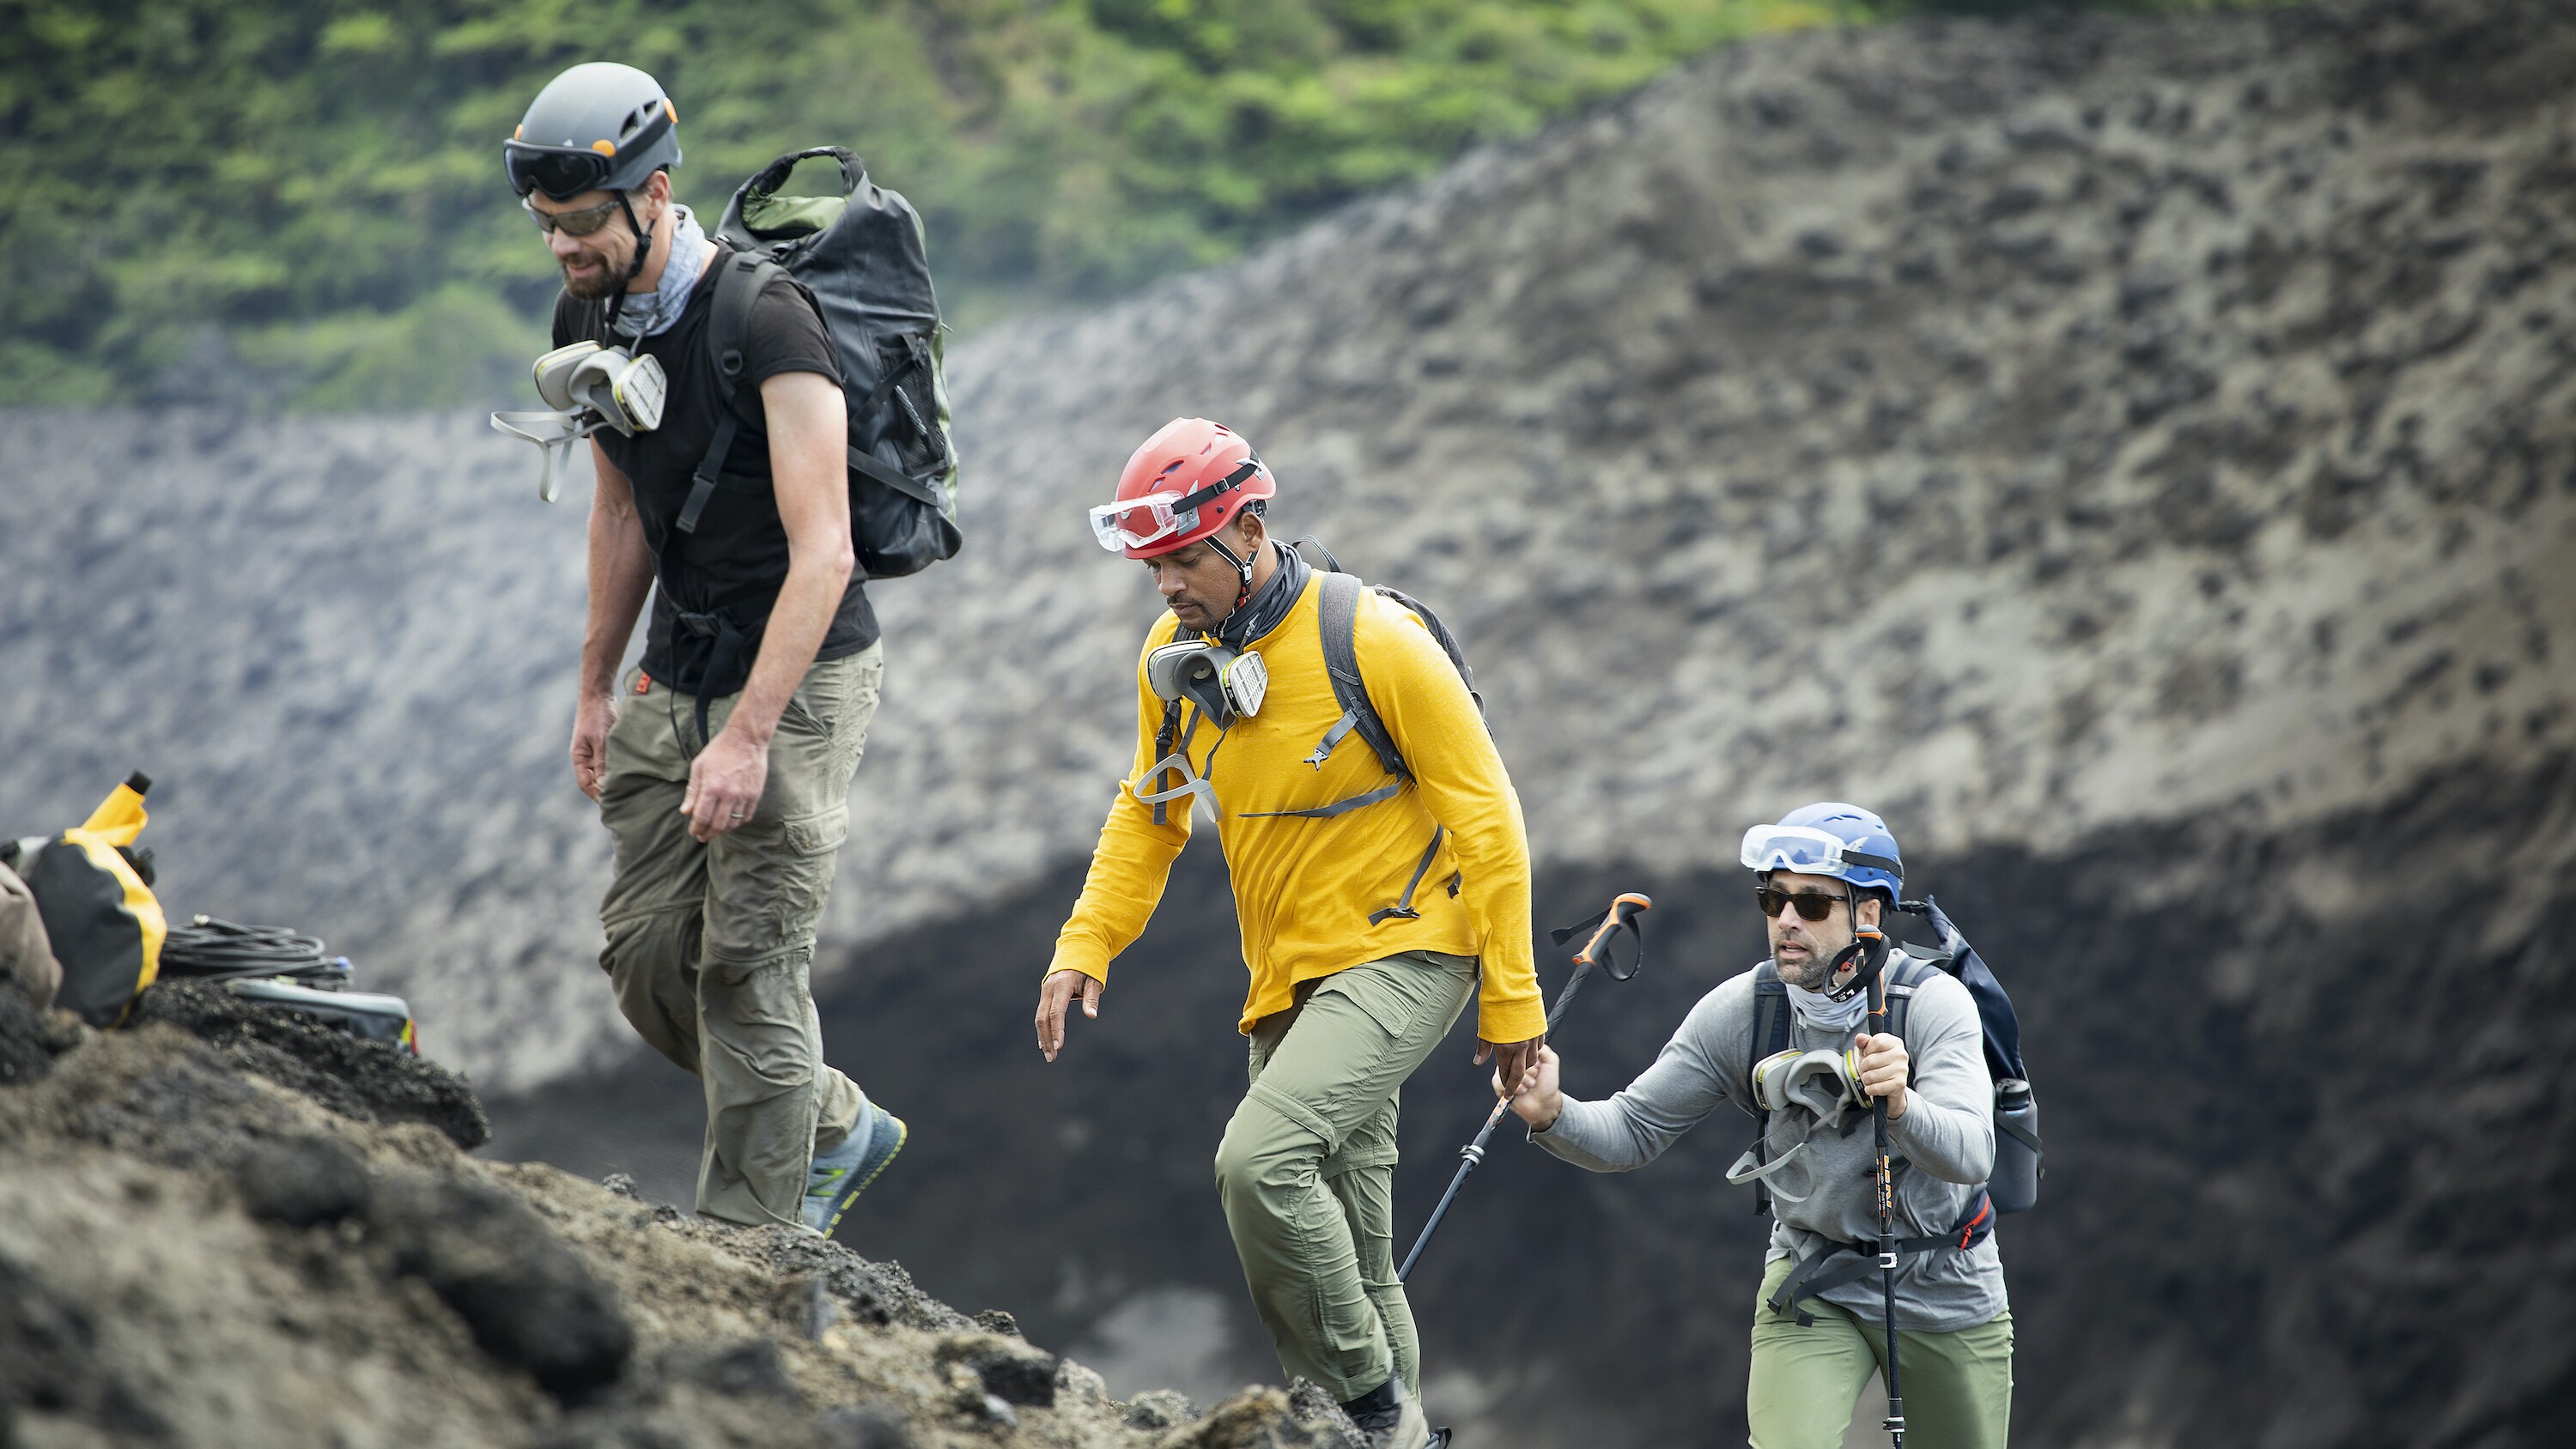 (L to R): Vulcanologist Jeff Johnson, Will Smith and Explorer Erik Weihenmayer prepare to descend into a volcano to install sensors. (National Geographic for Disney+/Kyle Christy)